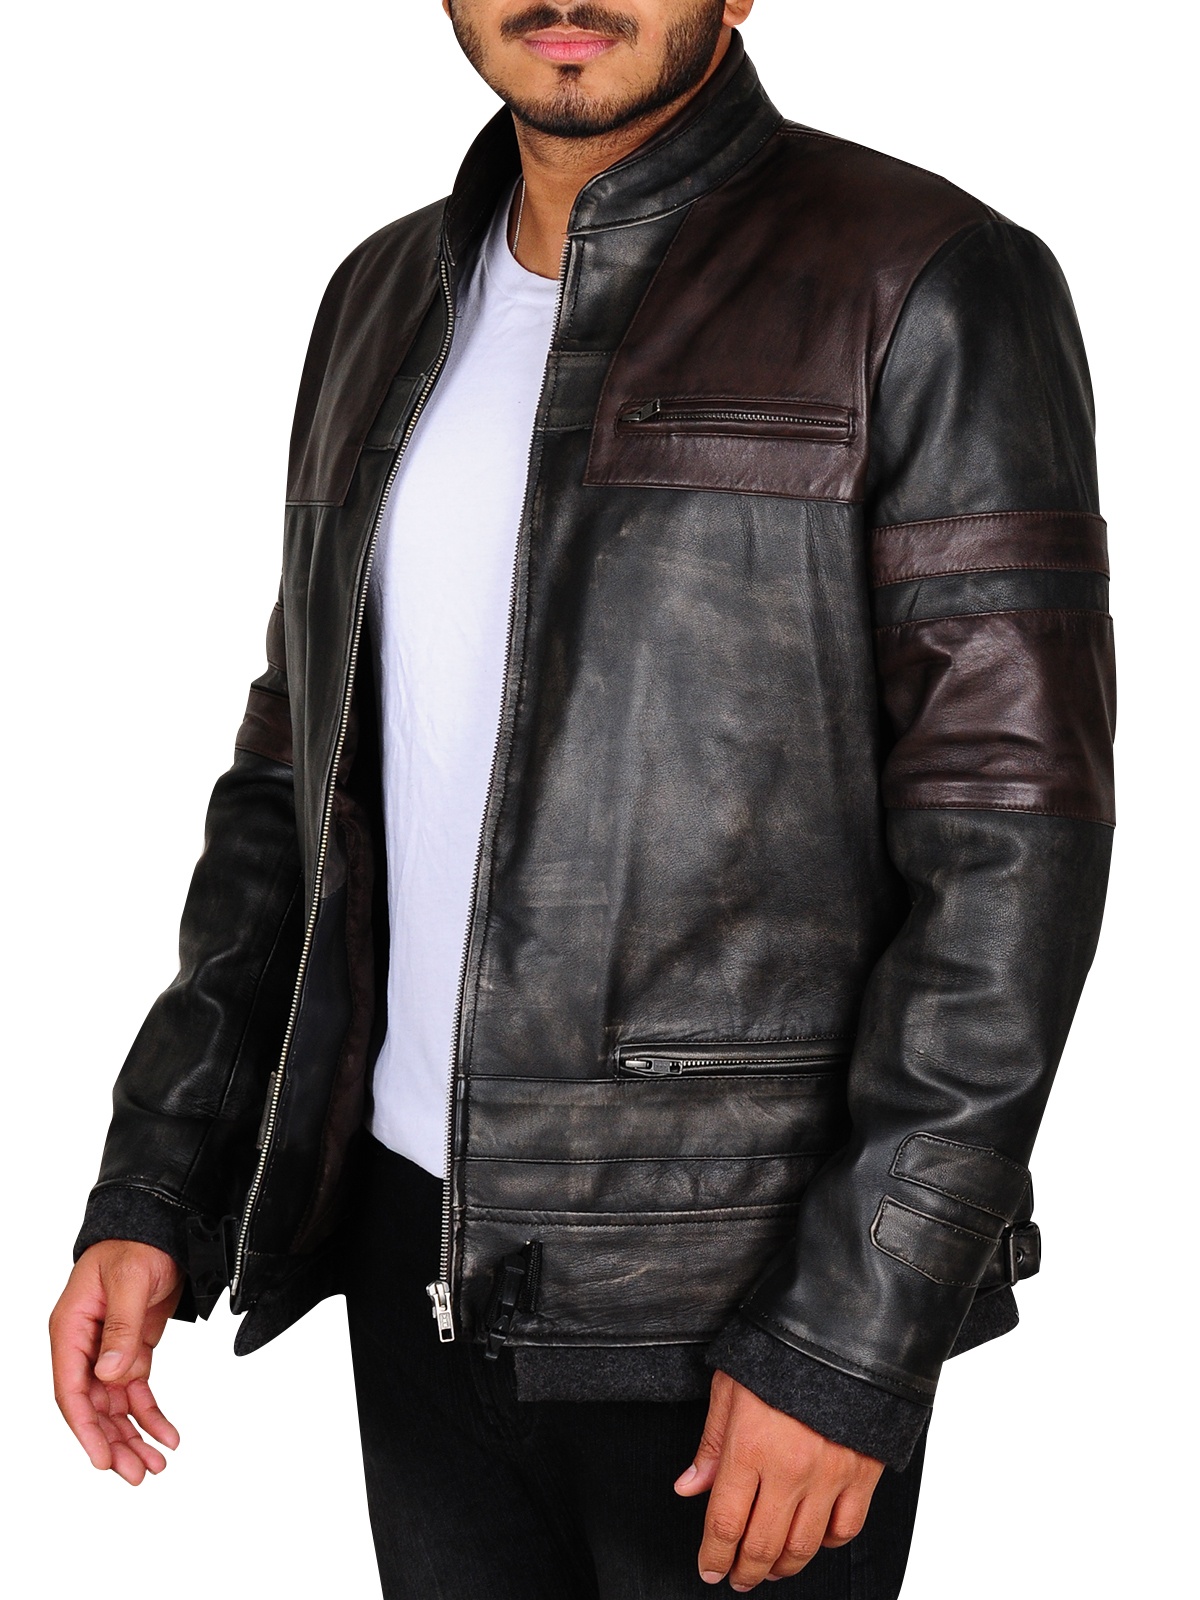 Starkiller Cosplay Leather Jacket - A2 Jackets